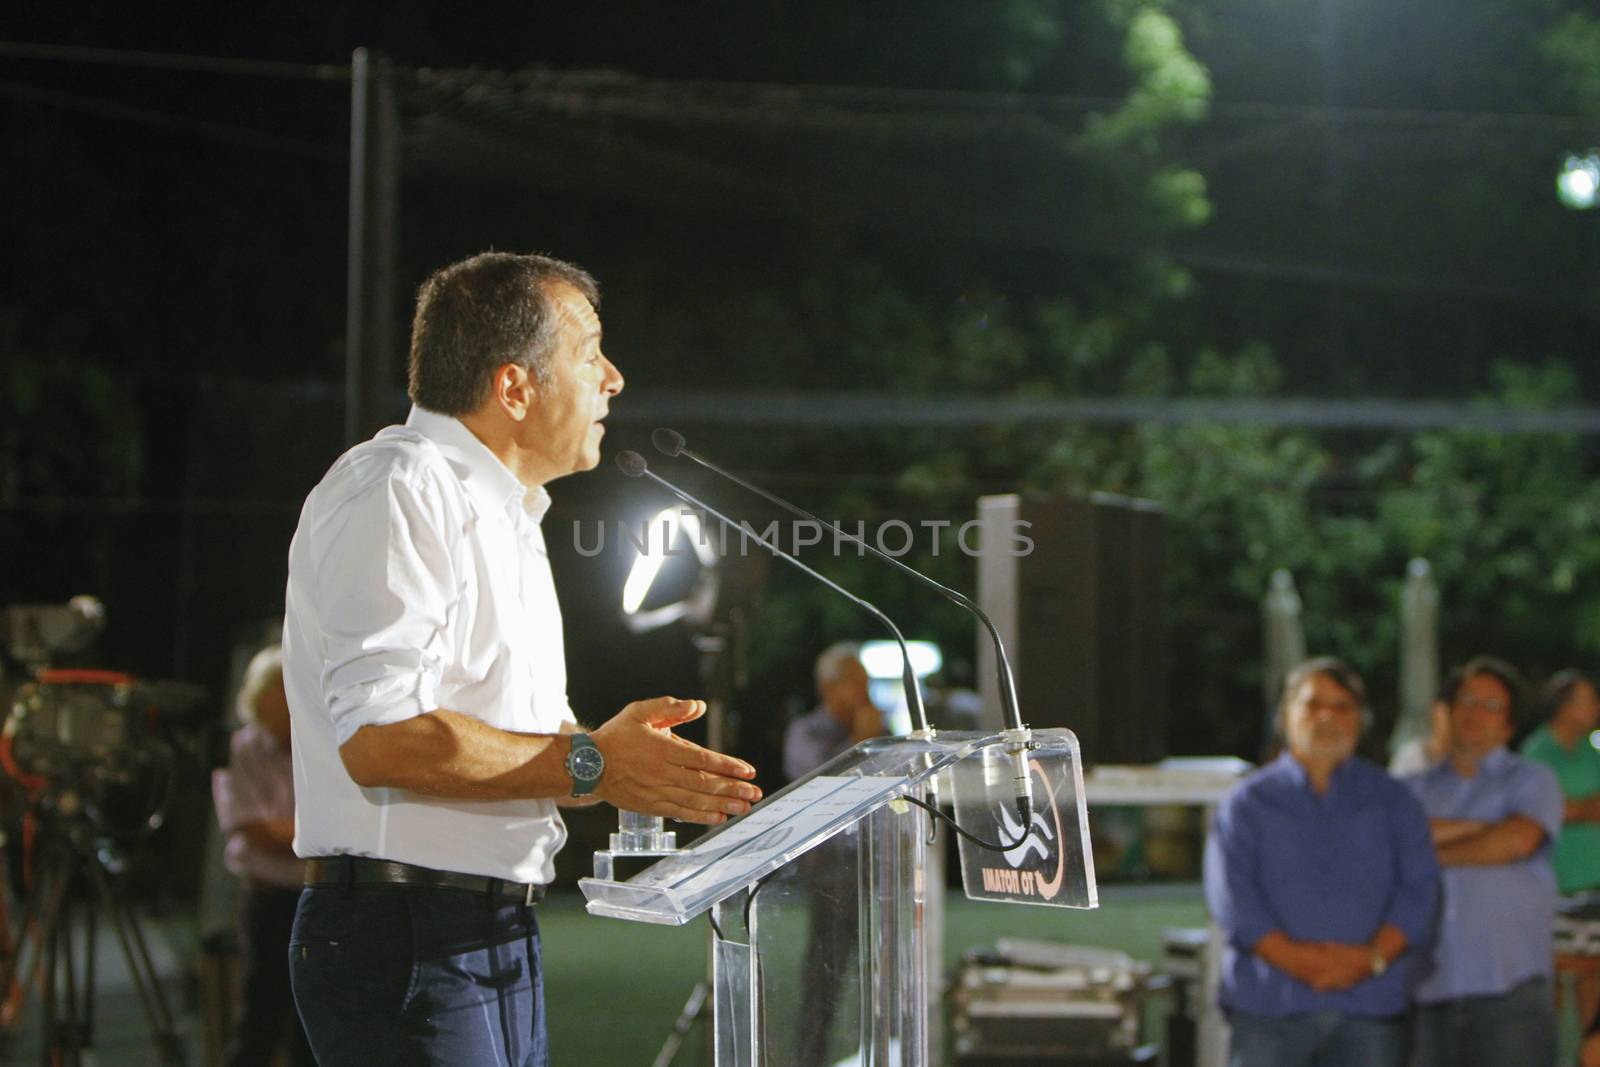 GREECE, Athens: Former-journalist and Party leader of To Potami ('The River') Stavros Theodorakis addresses a supporter rally in Athens on September 18, 2015, two days ahead of the Greek General election, the second to be held within the year